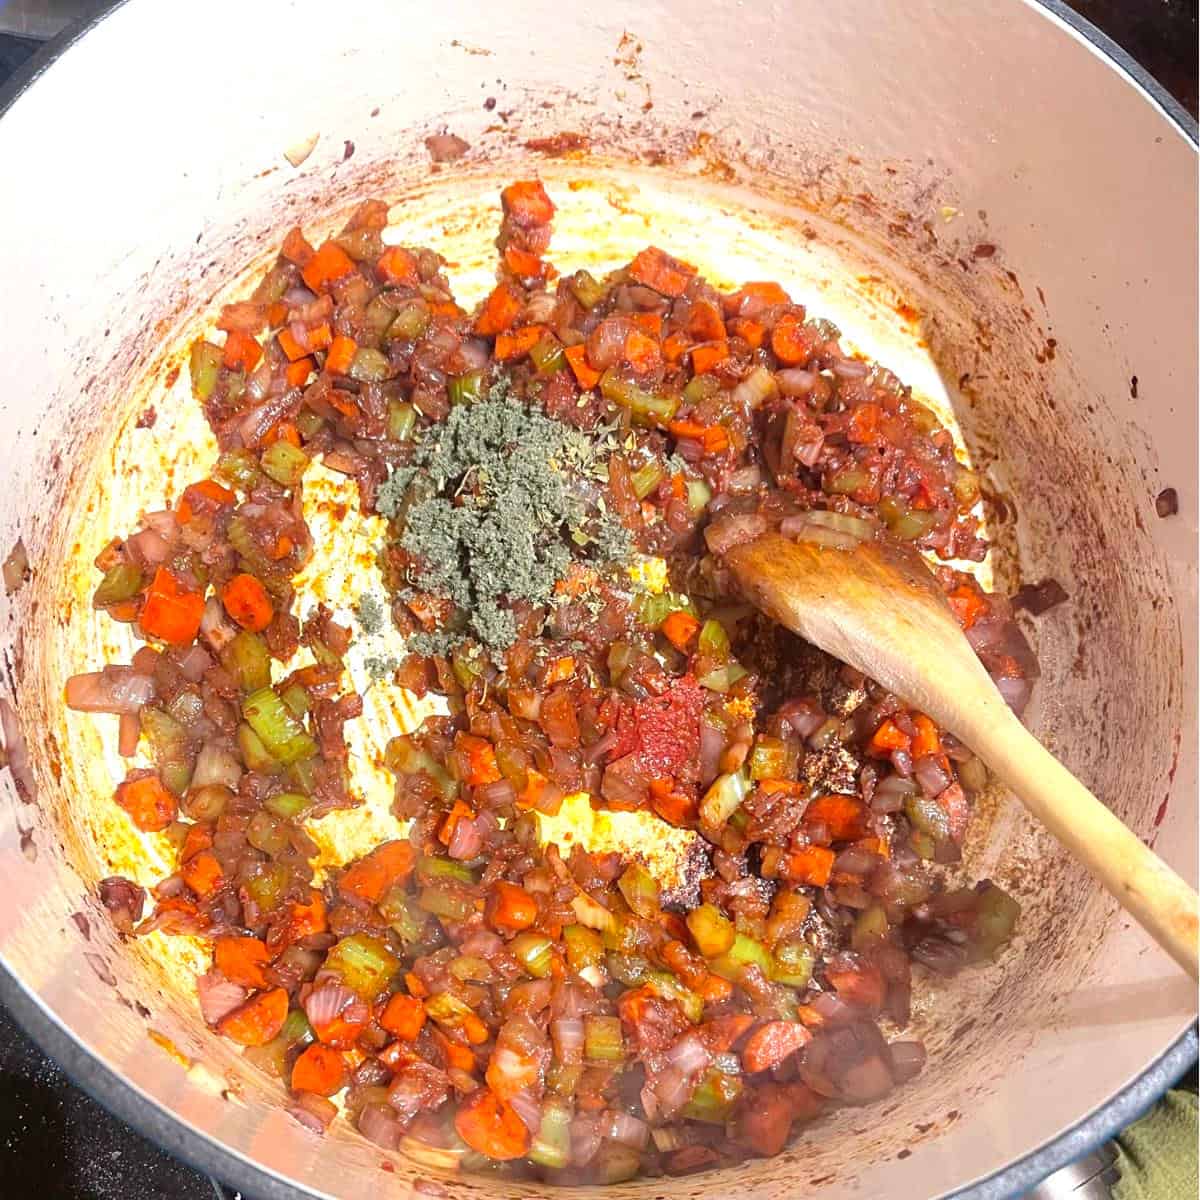 Herbs added to vegetables and tomato pastes in Dutch oven.